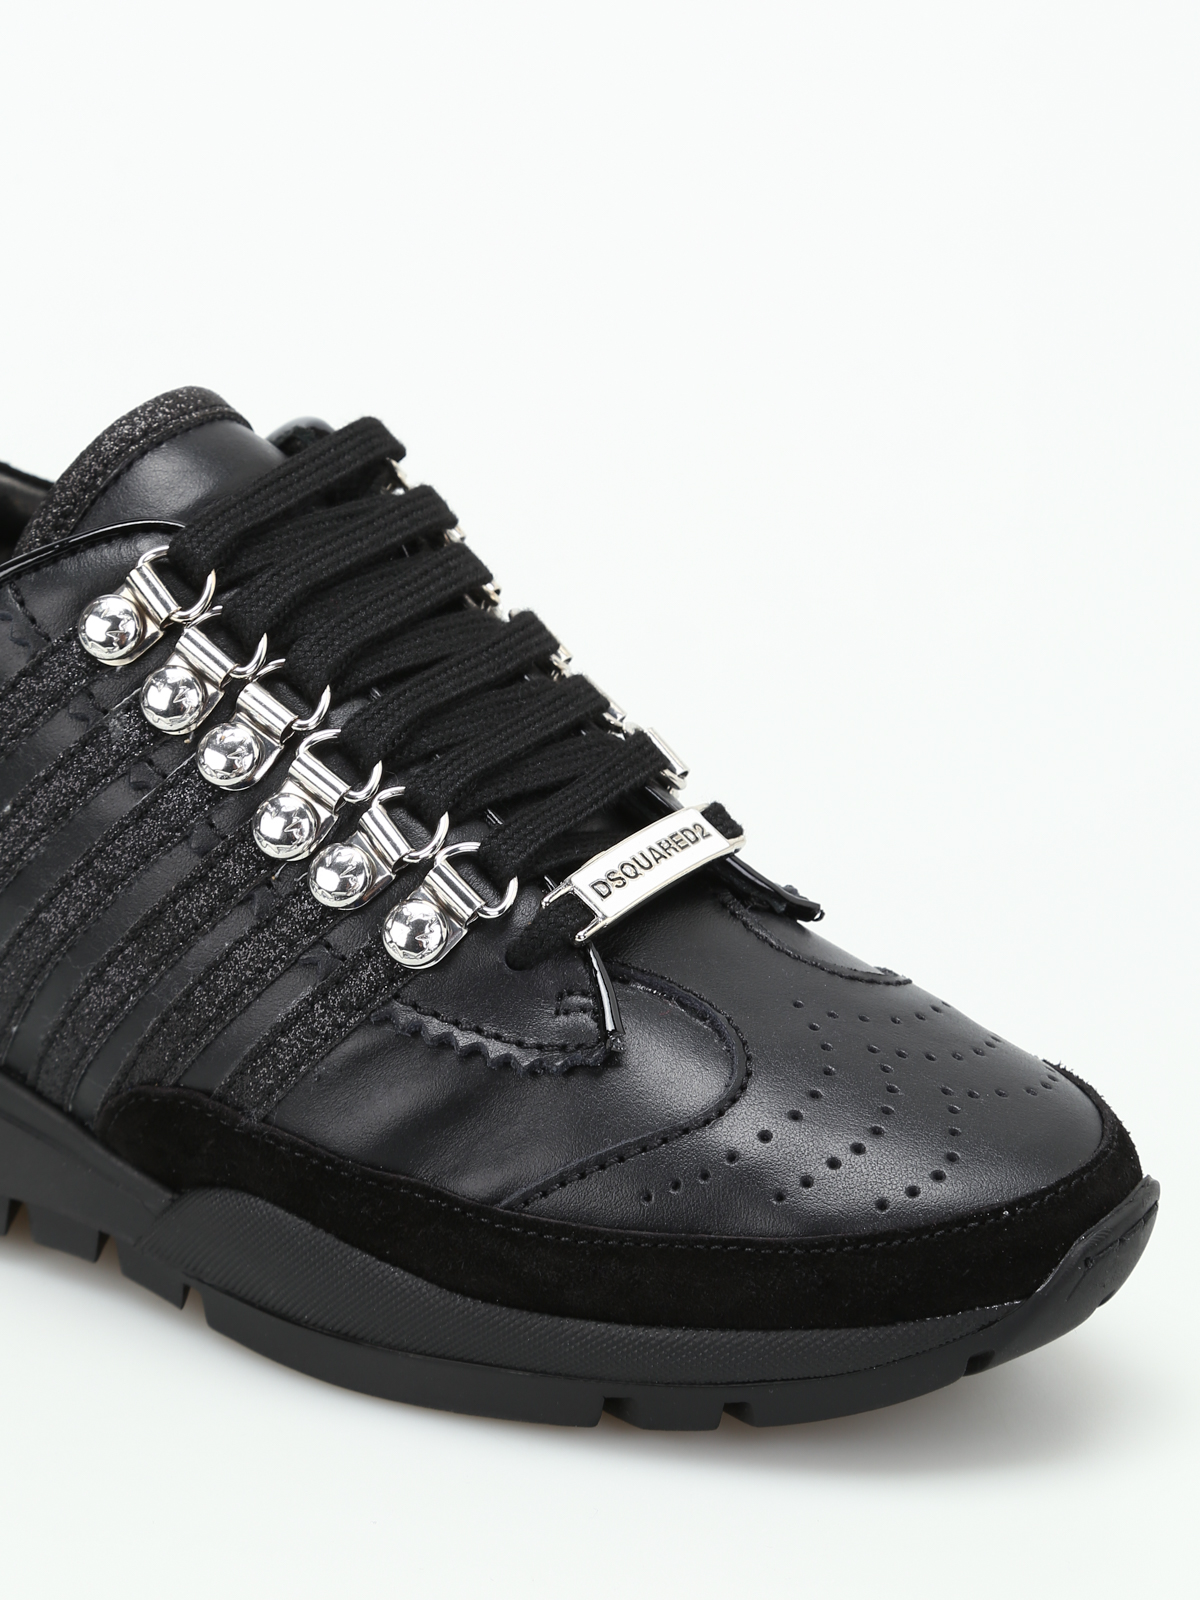 Dsquared2 - 251 black leather sneakers W17K2010652124